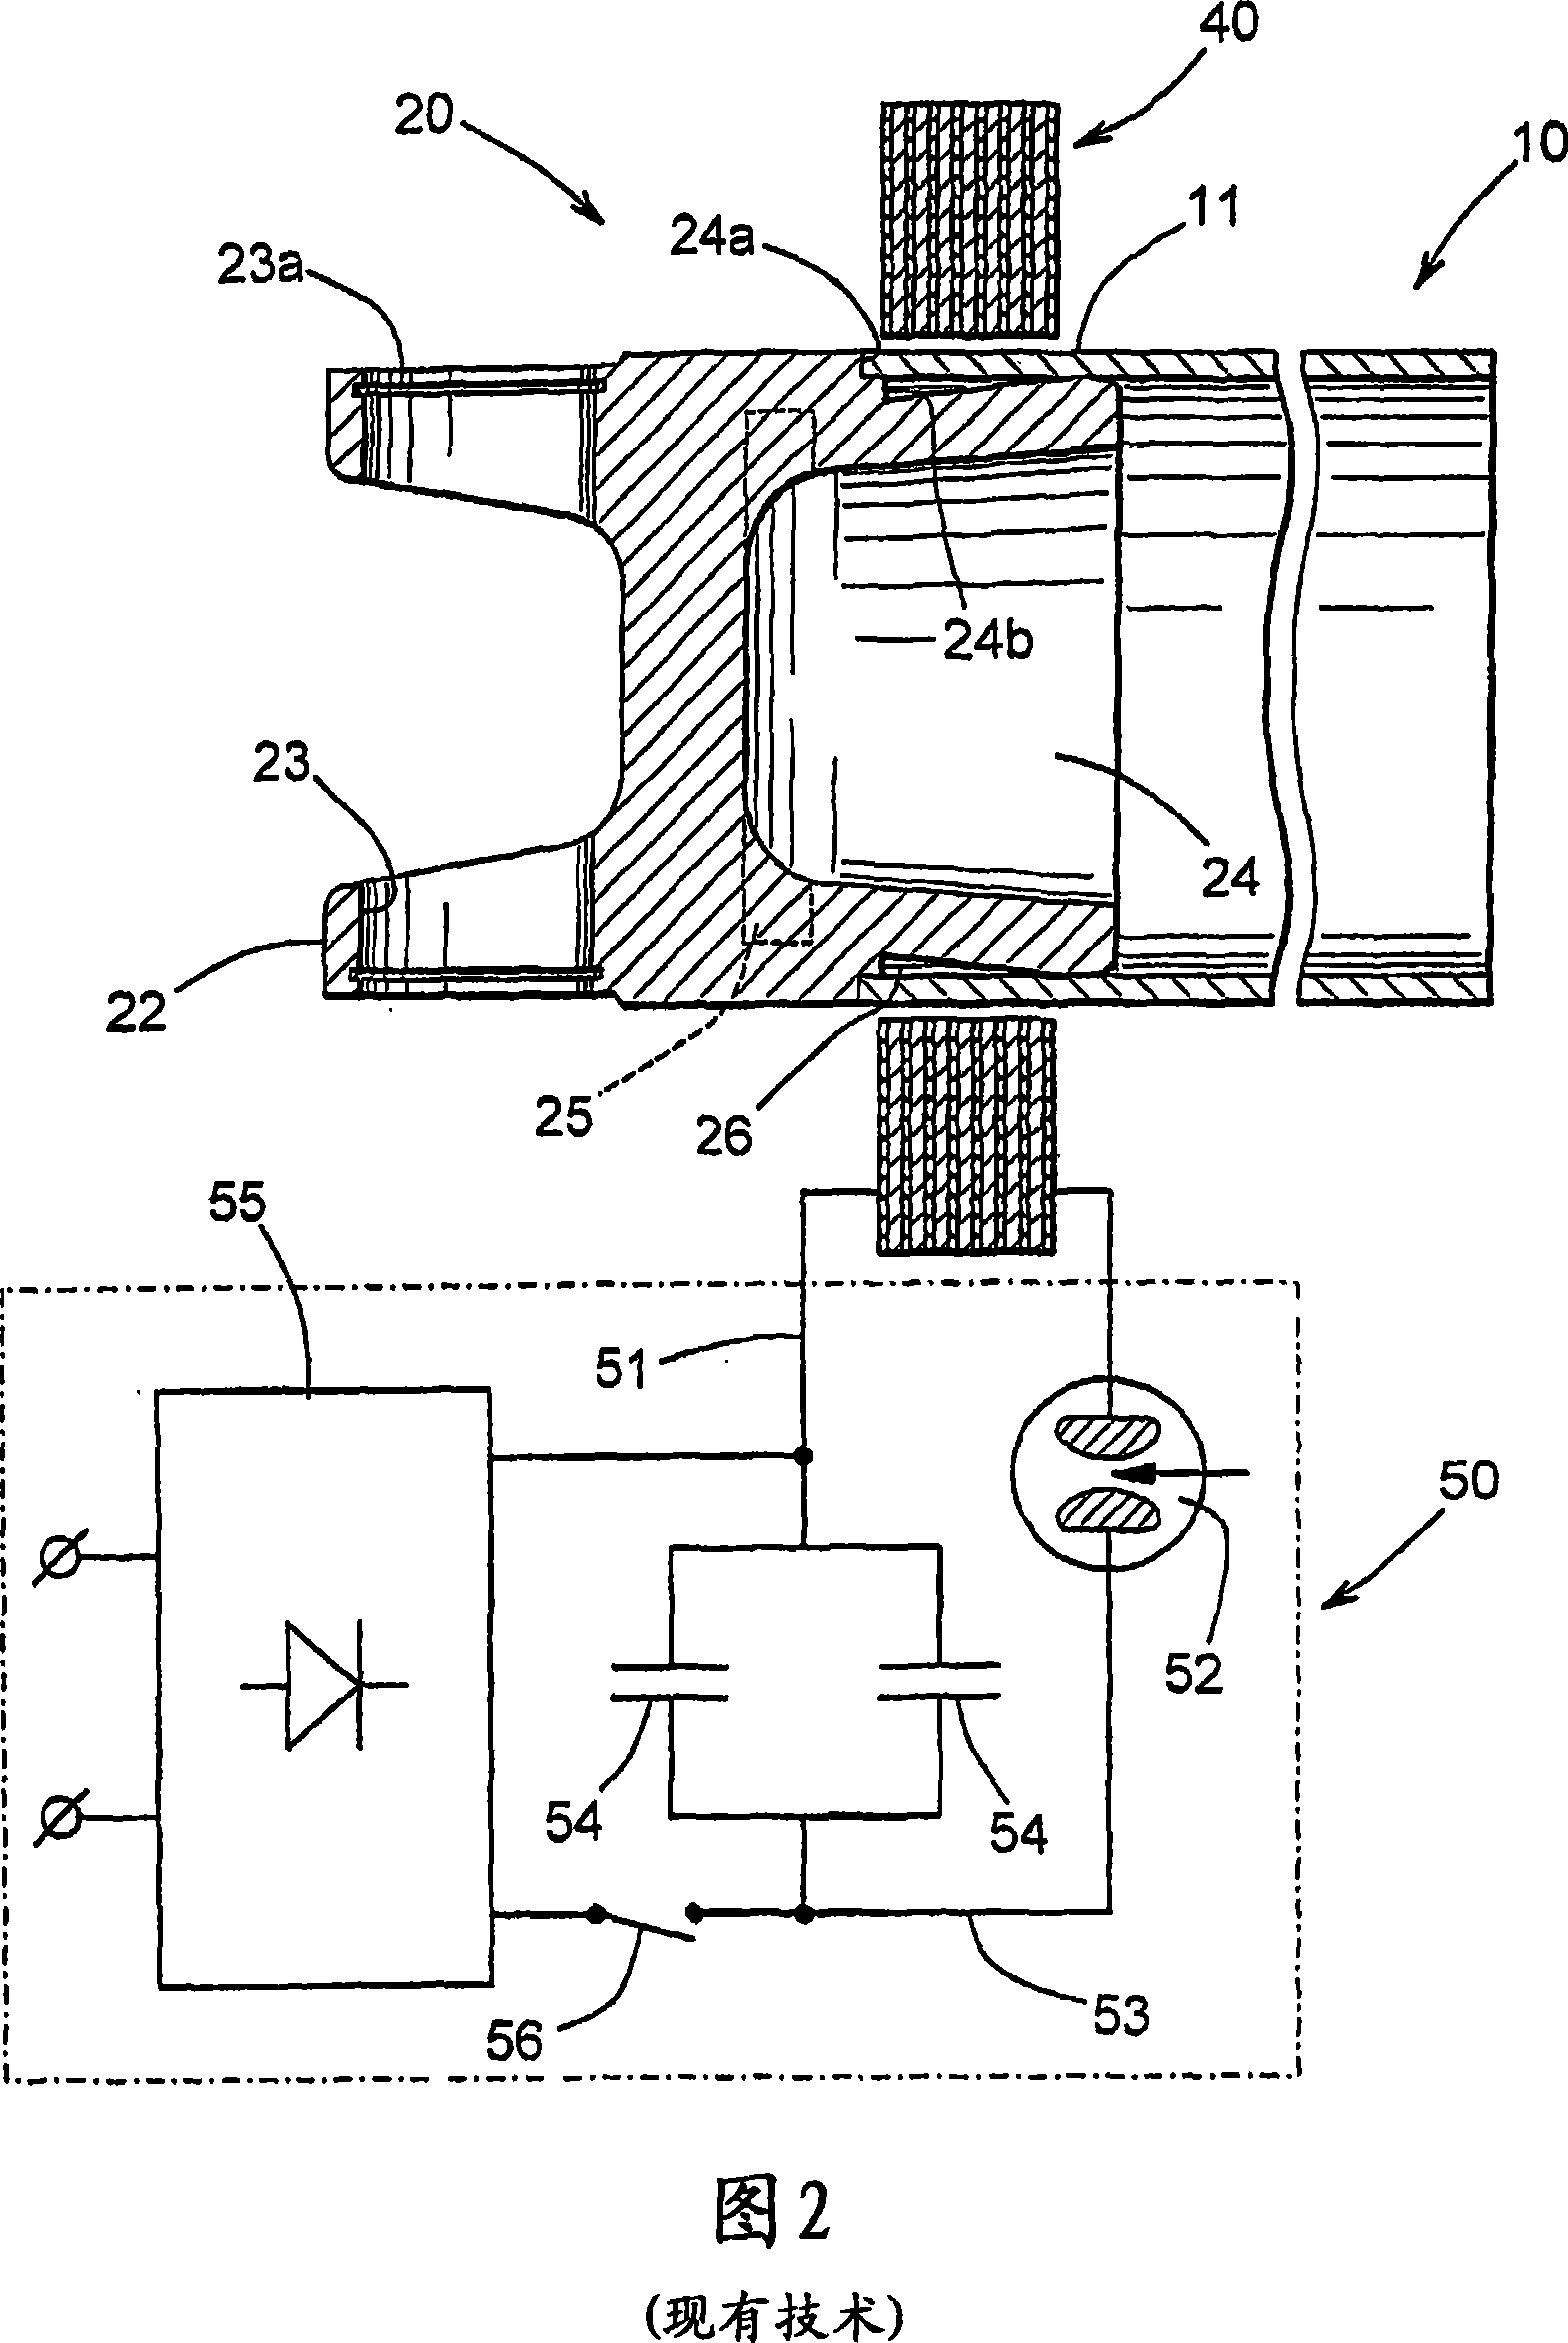 Method for performing a magnetic pulse welding operation to secure first and second metallic components with a preheating step for softening a first part of the first member